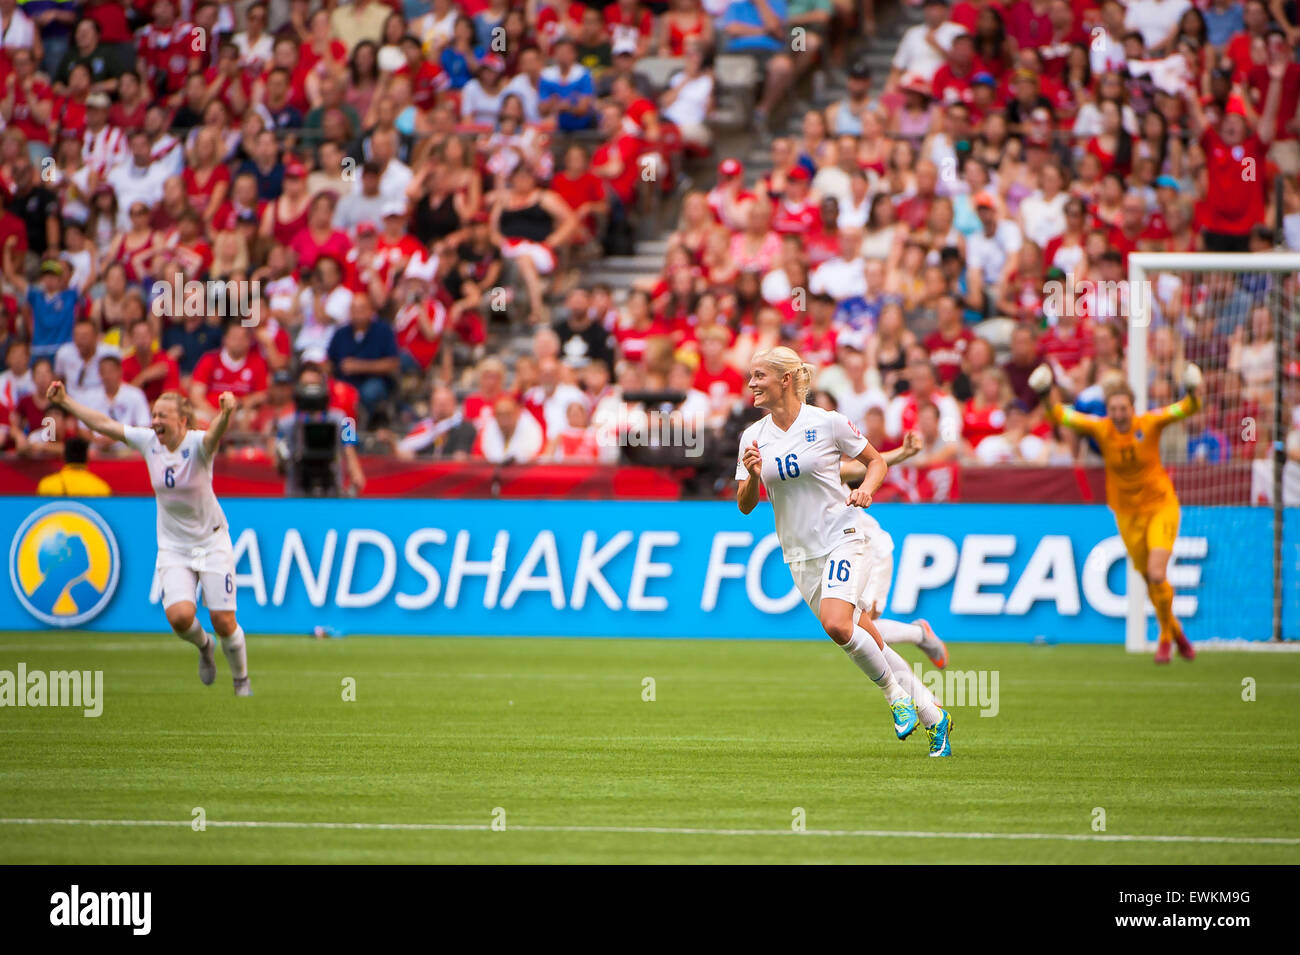 Vancouver, Canada. 27th June, 2015. England midfielder Katie Chapman (#16) and teammates celebrate following the quarterfinal match between Canada and England at the FIFA Women's World Cup Canada 2015 at BC Place Stadium. England won the match 2-1. Credit:  Matt Jacques/Alamy Live News Stock Photo